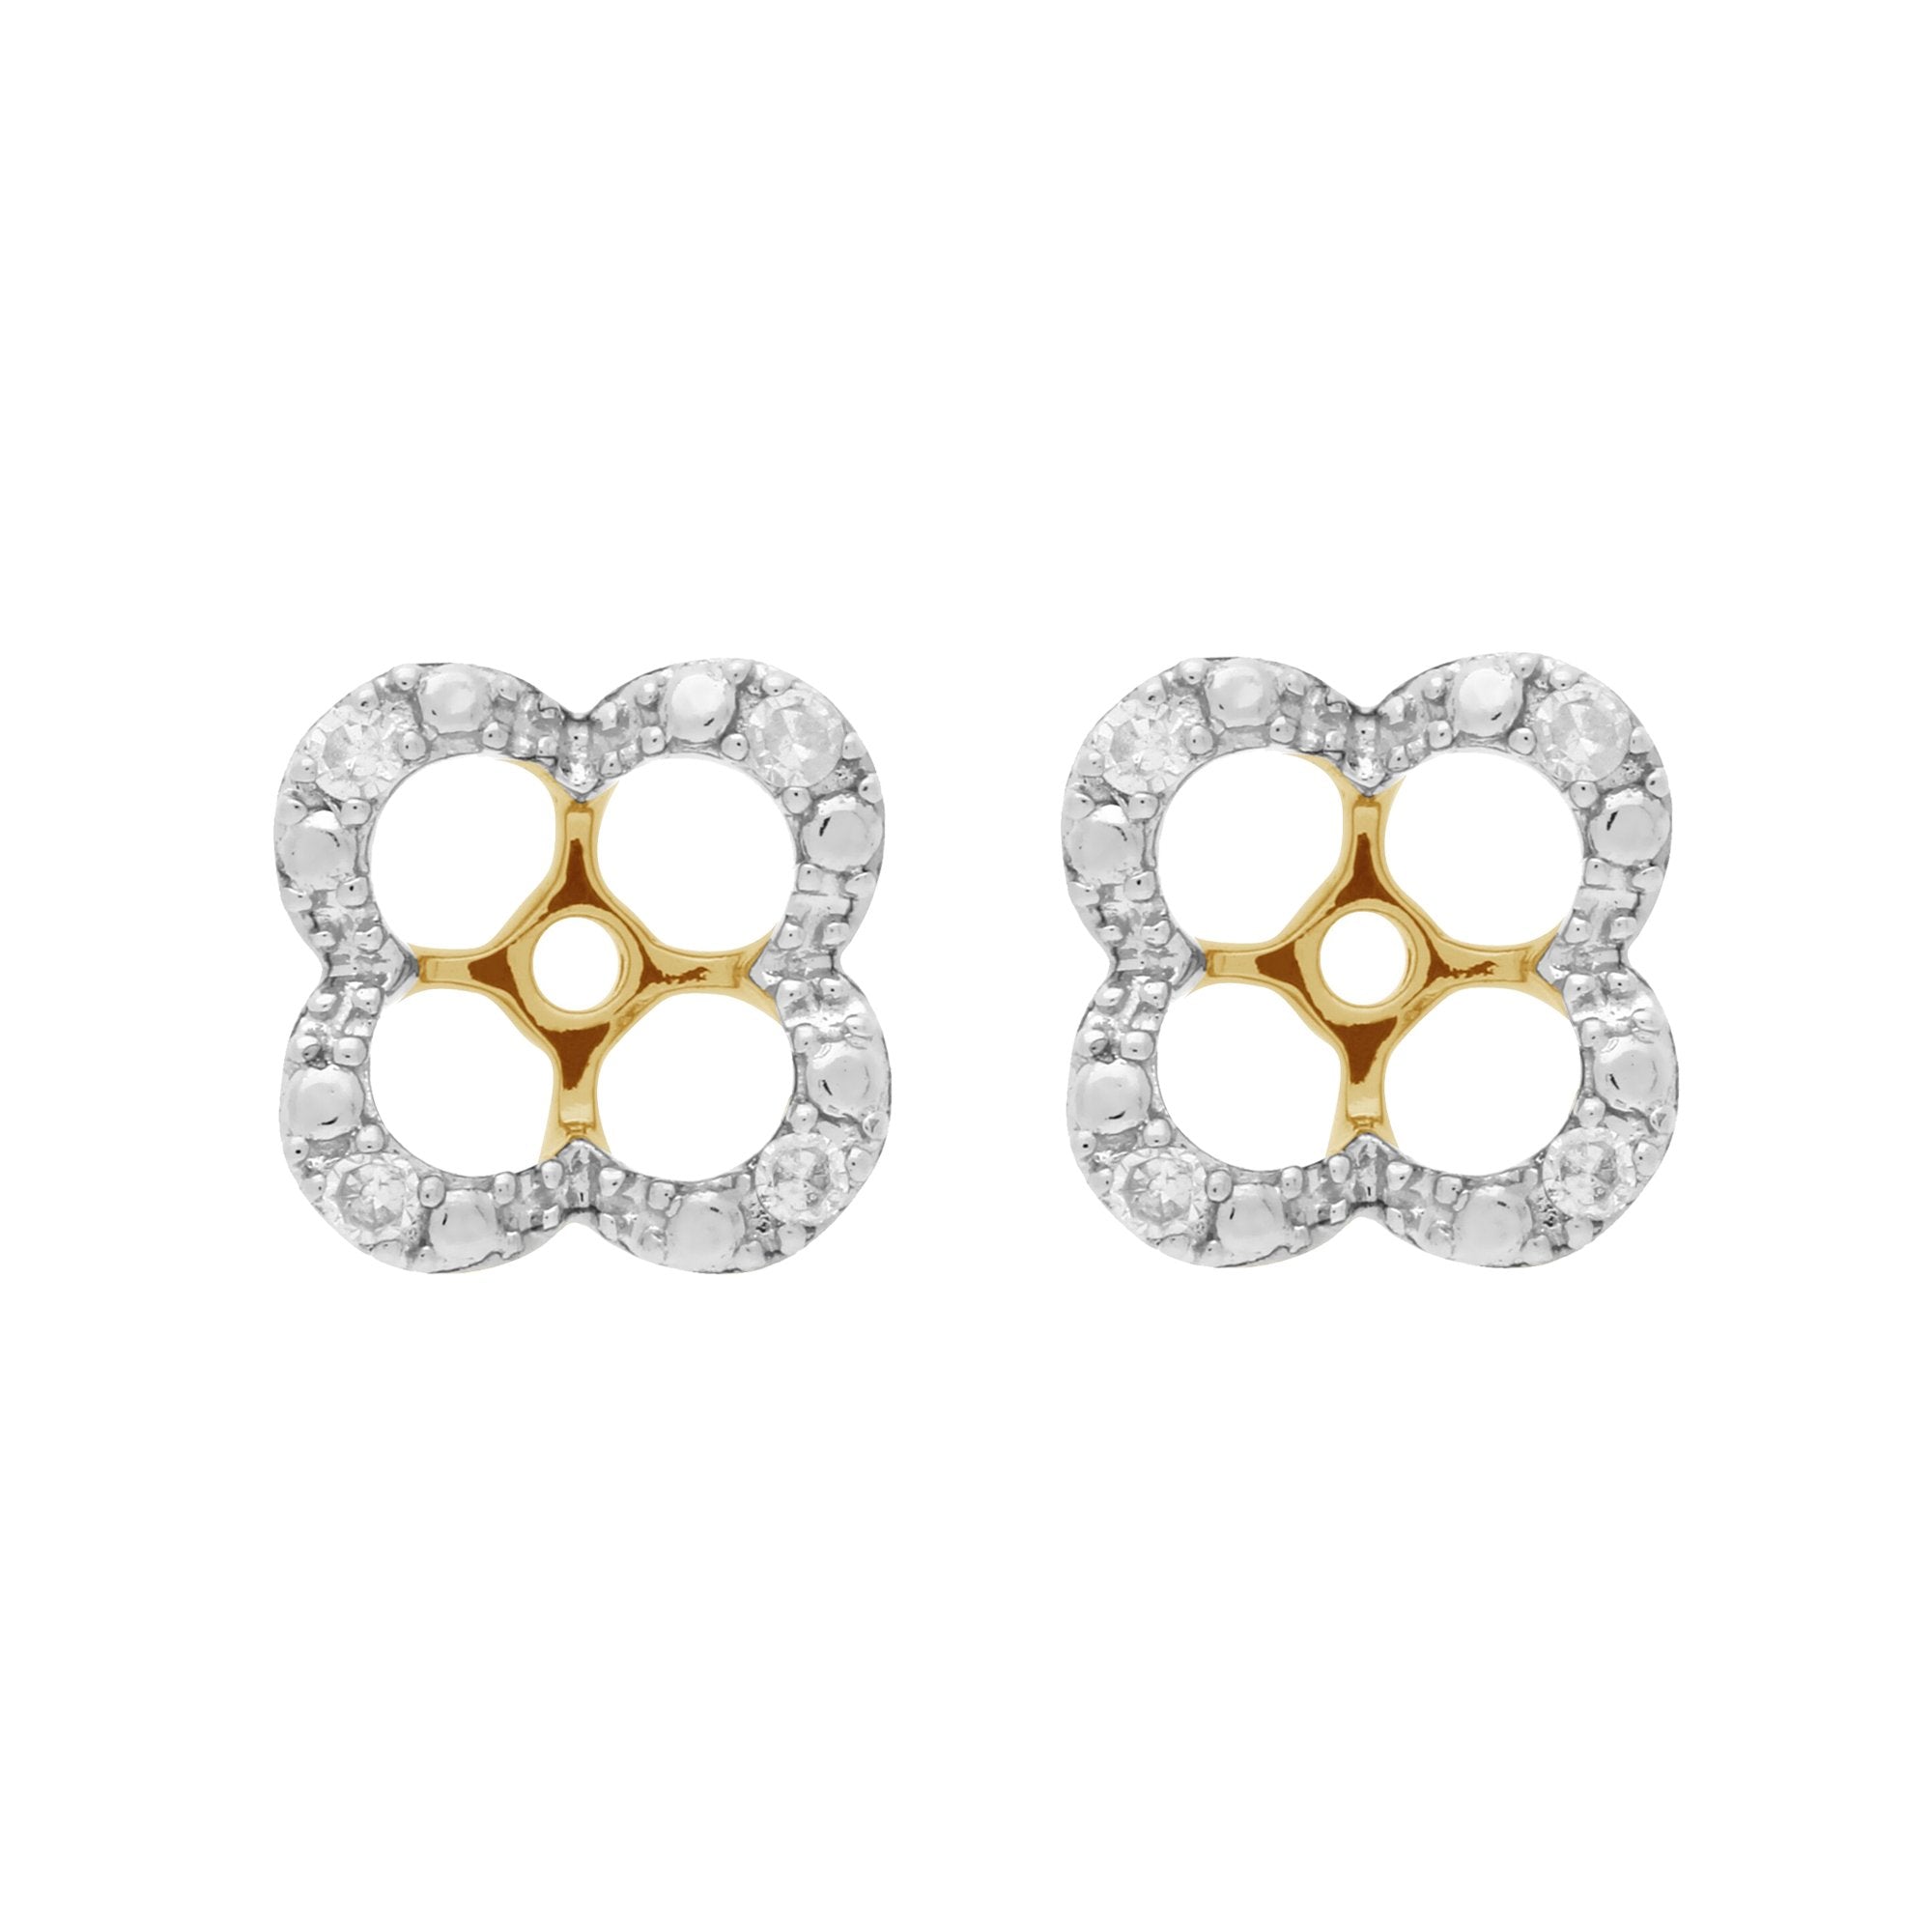 Floral Round Diamond Clover Shape Earrings Jacked in 9ct Yellow Gold